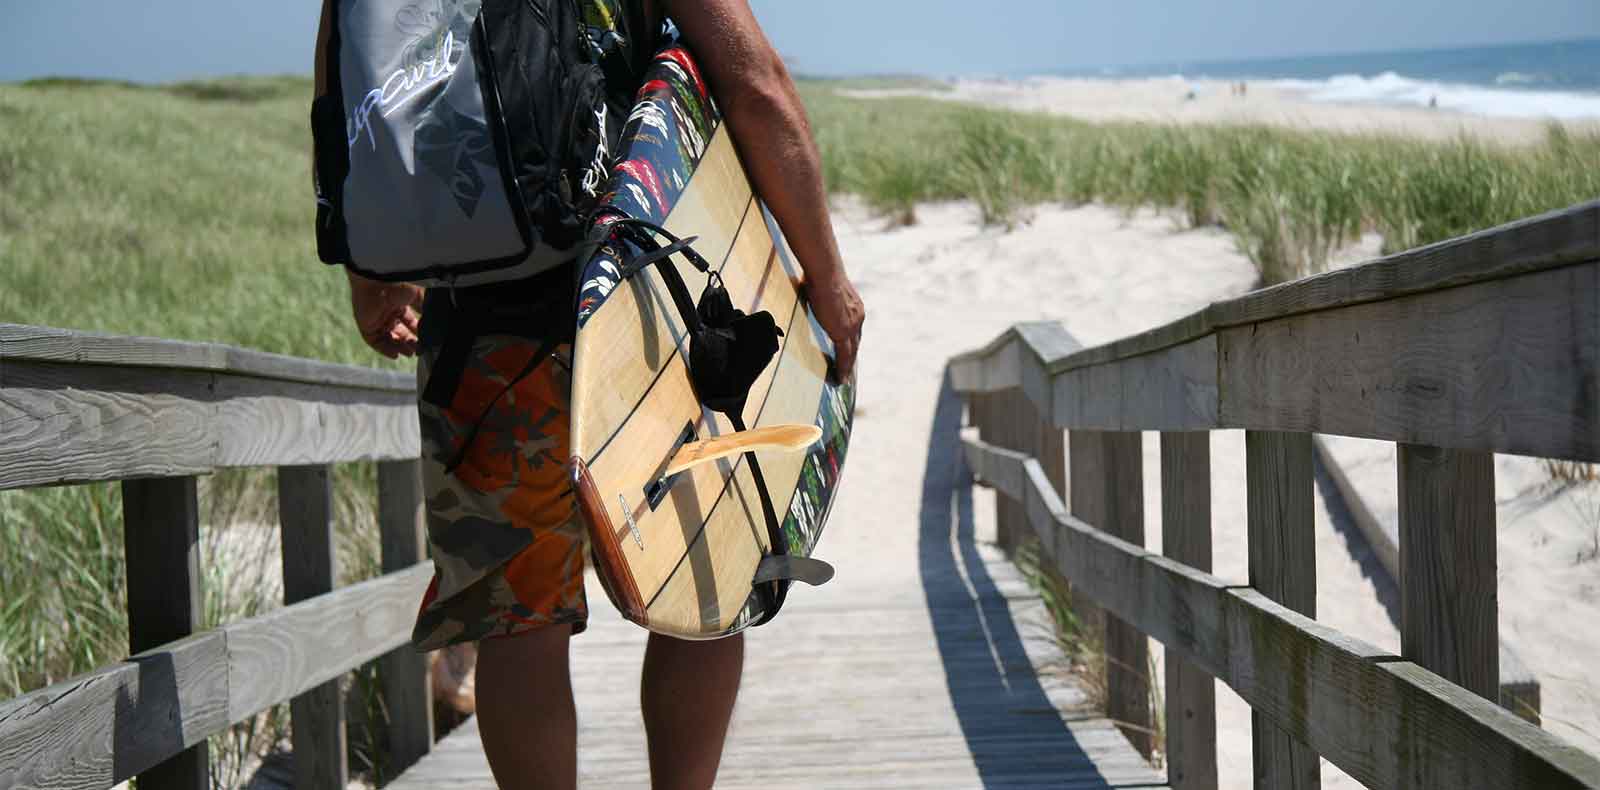 Walking over a wooden bridge to the beach with a surfboard